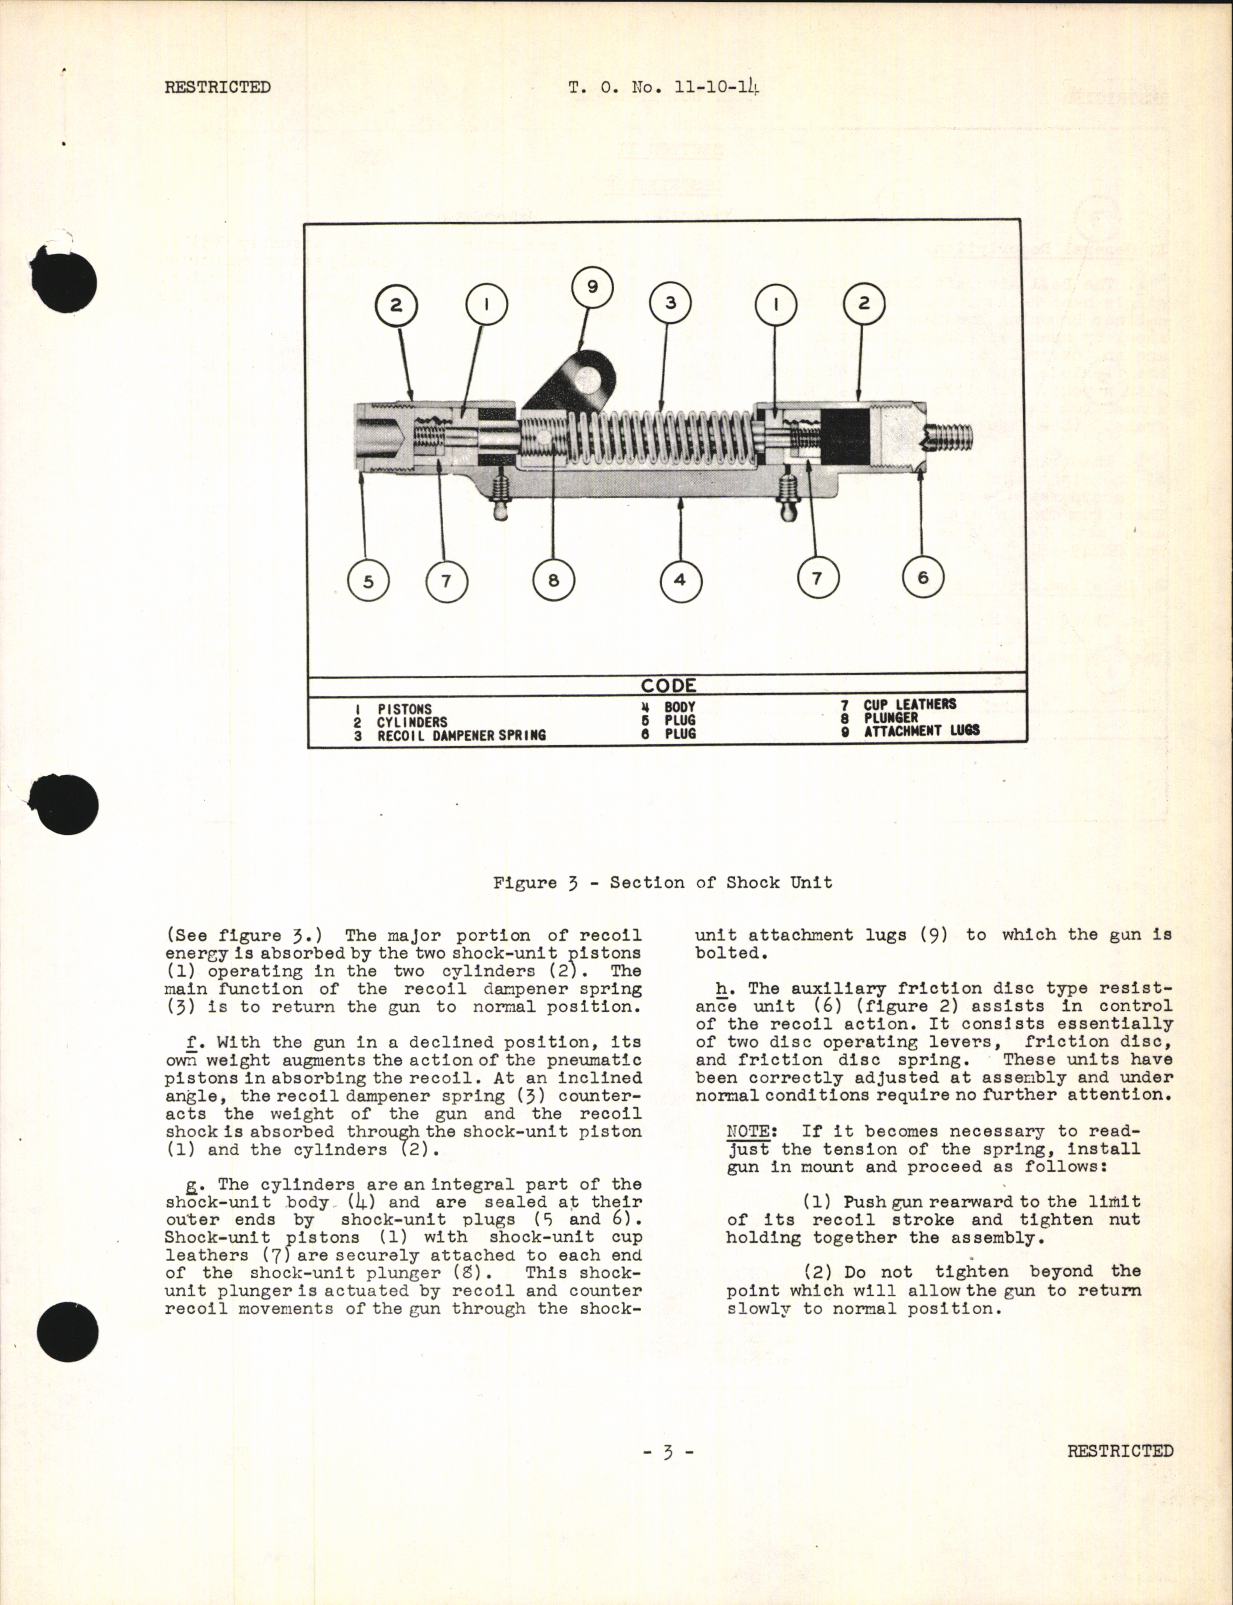 Sample page 7 from AirCorps Library document: Handbook of Instructions with Parts Catalog for Type C-16 Single Gun Mount Adapter